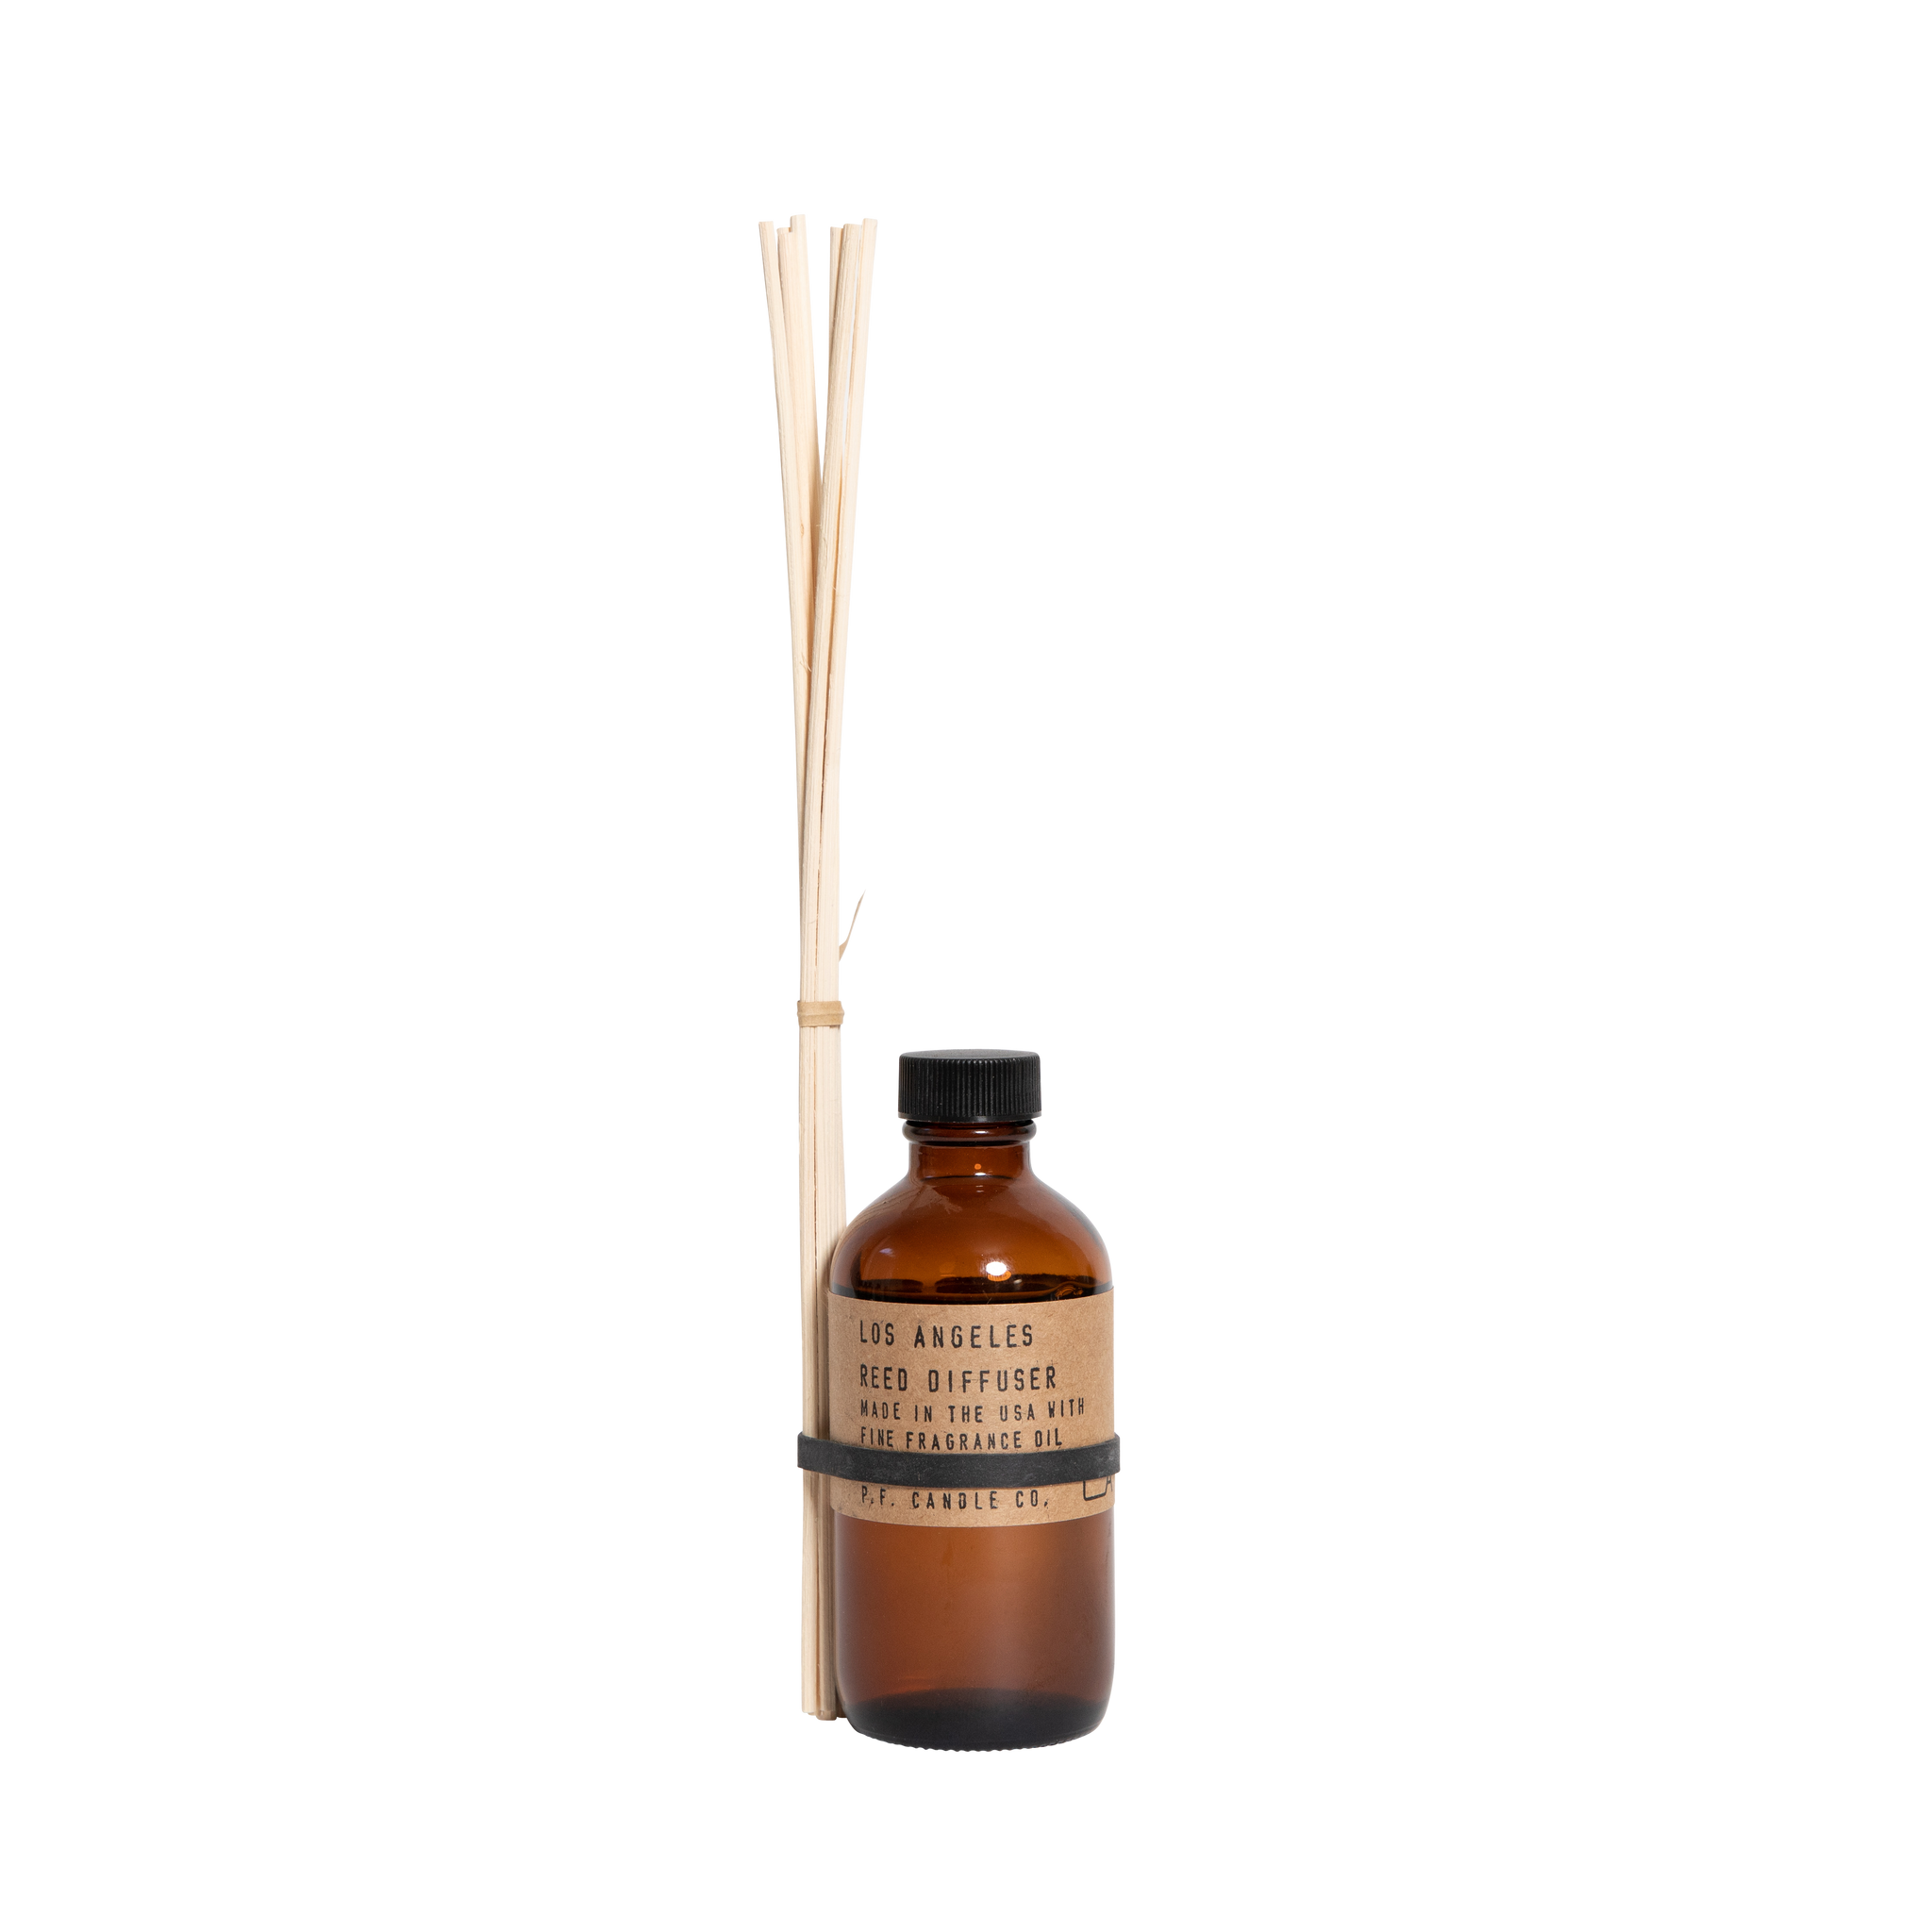 P.F CANDLE CO. LOS ANGELES - 3.5 OZ REED DIFFUSER